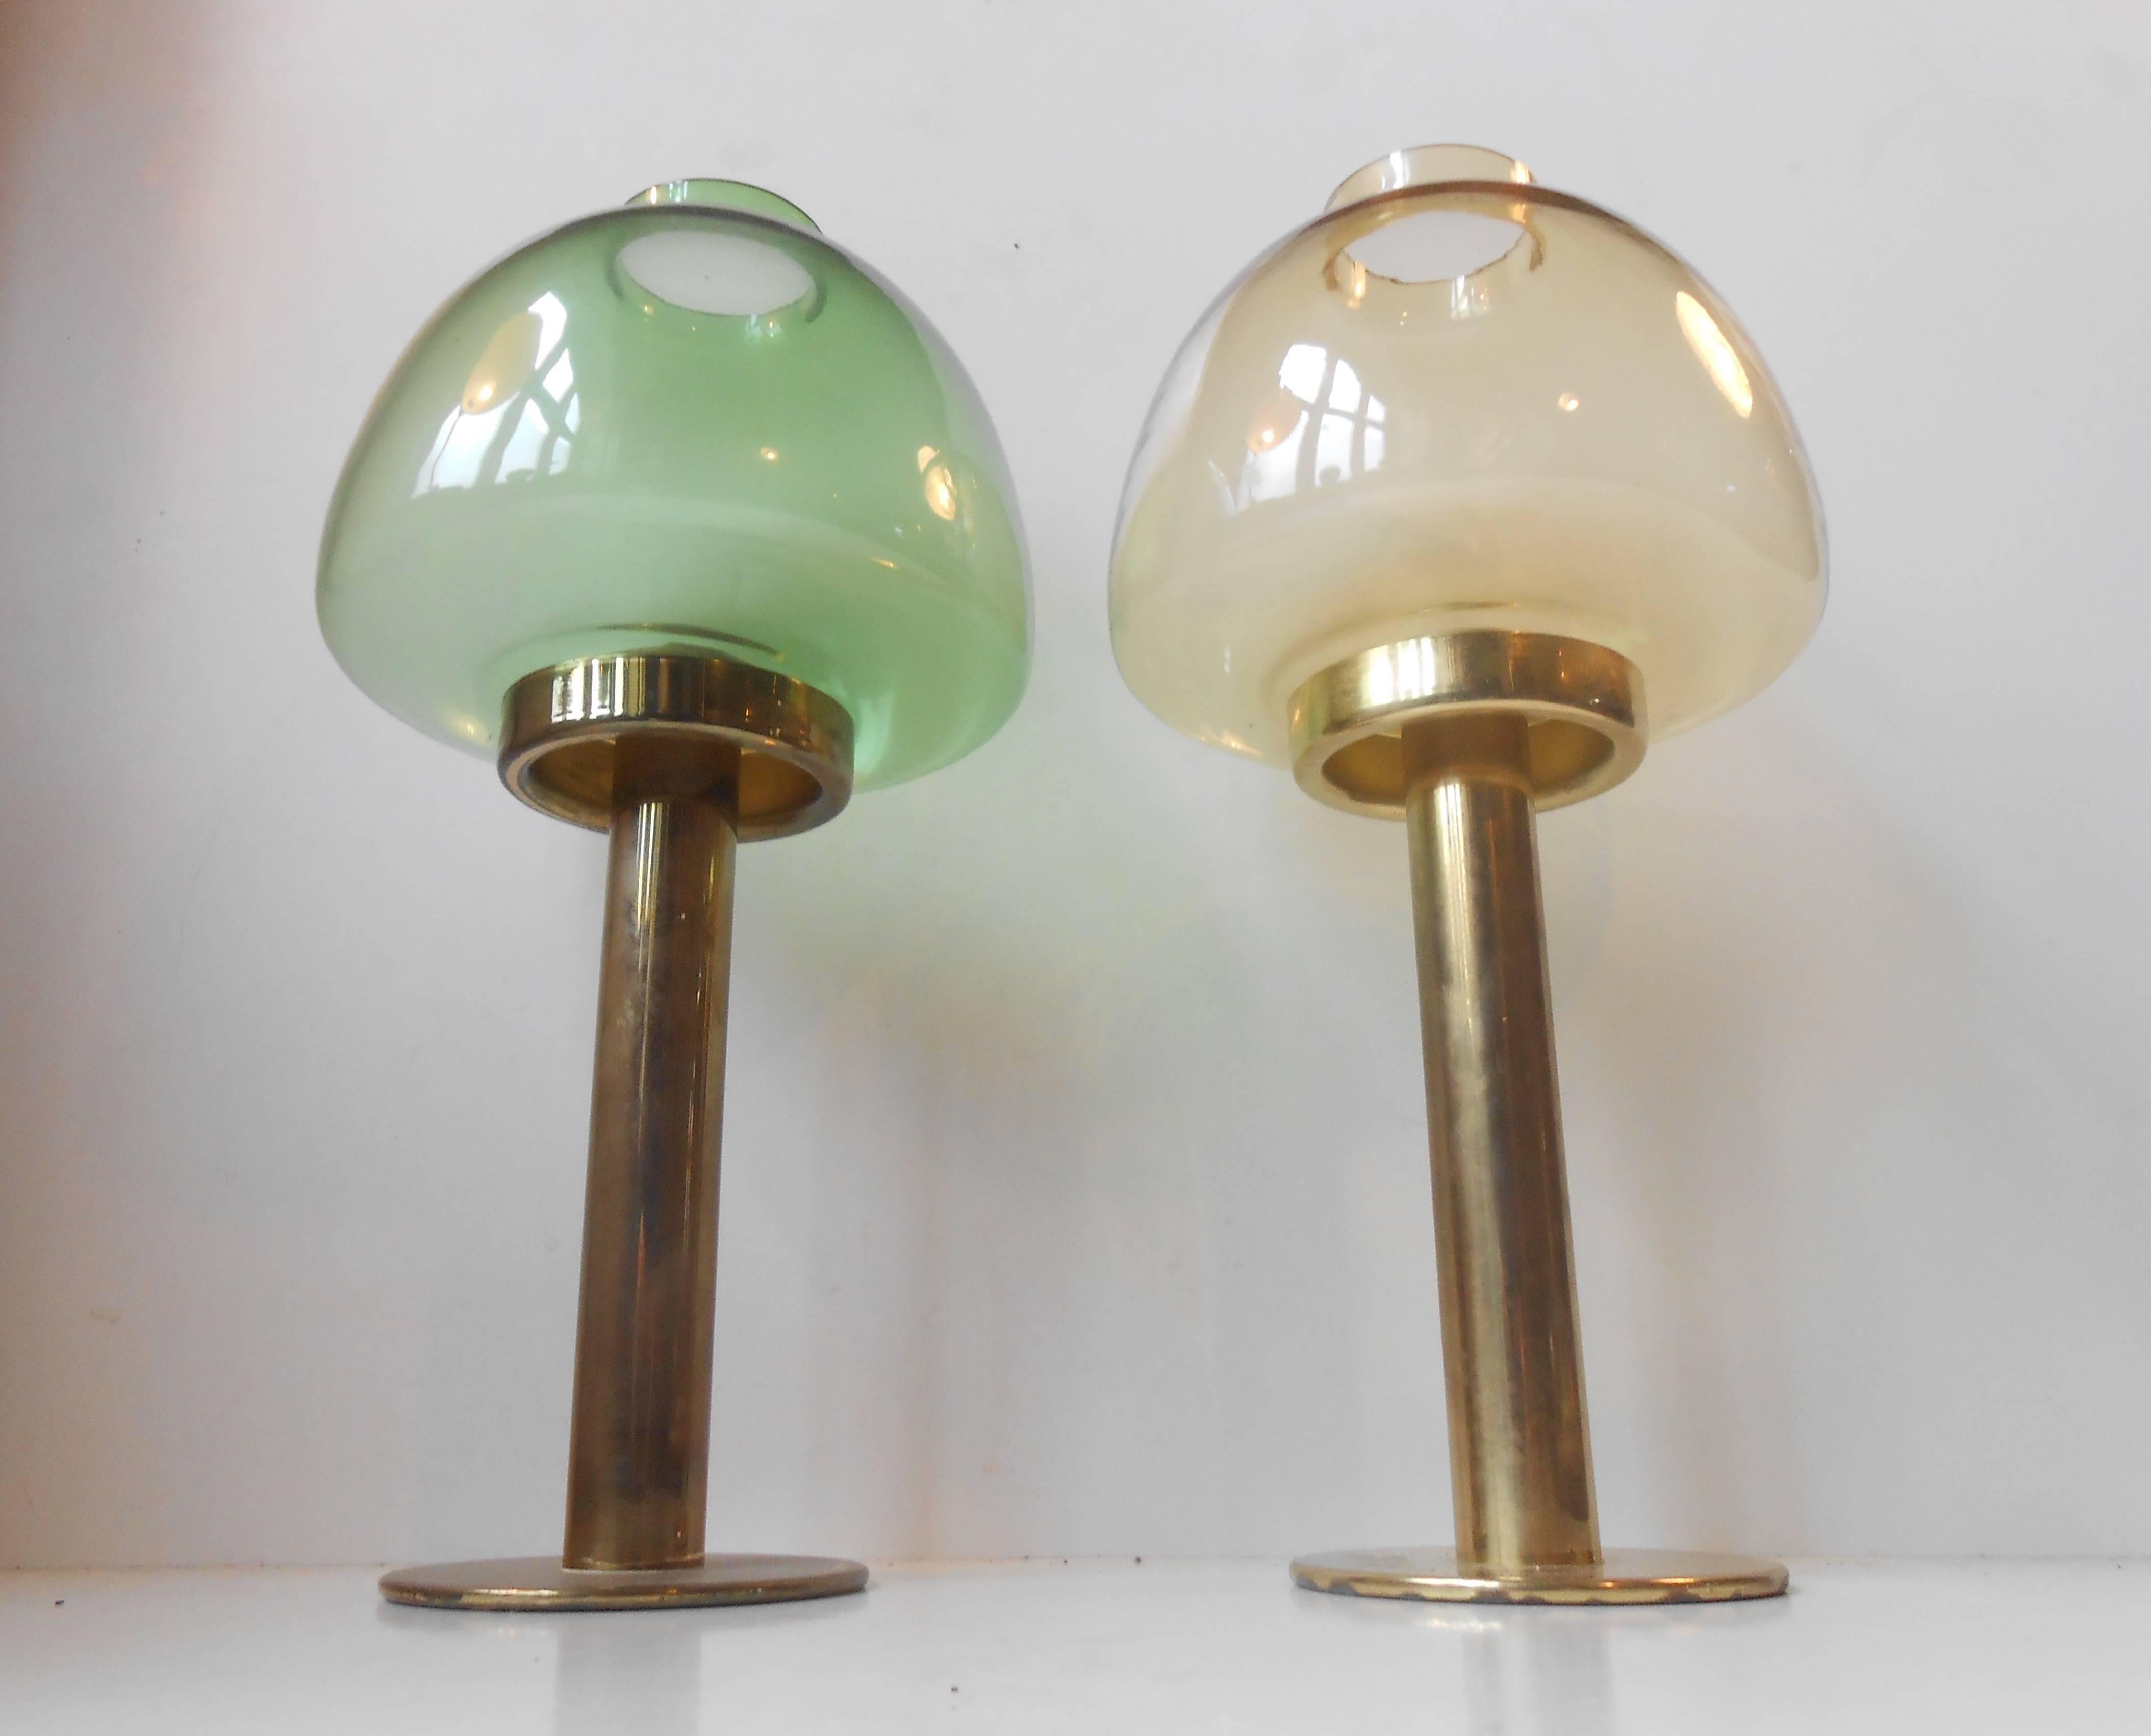 Pair of brass candleholders by Hans-Agne Jakobsson for Markaryd, Sweden, circa 1960. Model: L 102/32. Green and yellow glass. Spring-system that makes the candle set at the right height all the time. Diameter base is 10cm (4 inches), diameter glass